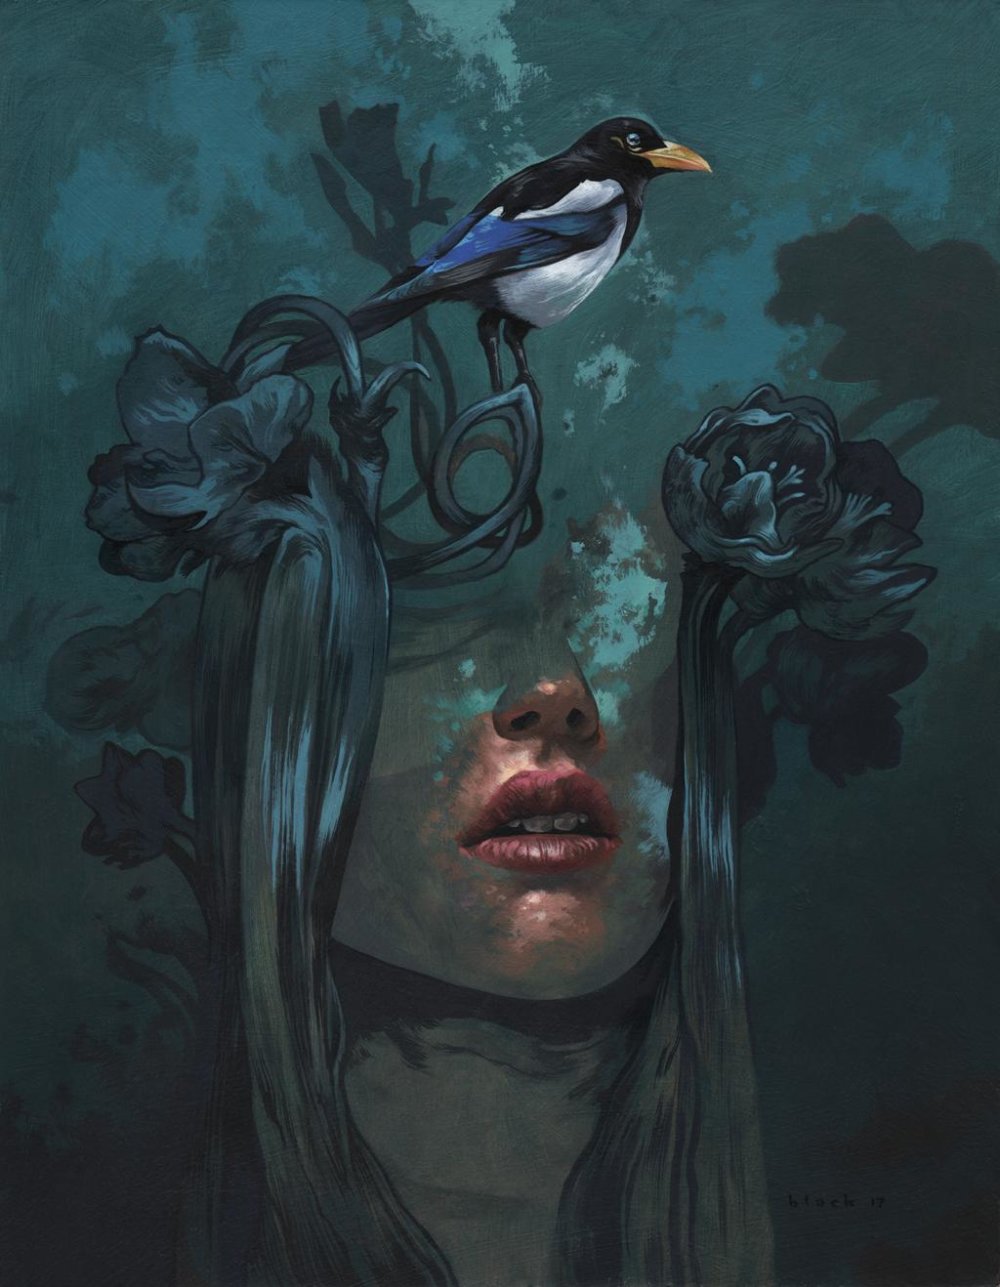 Dark girls: somber and surreal paintings by Steven Russell Black 4